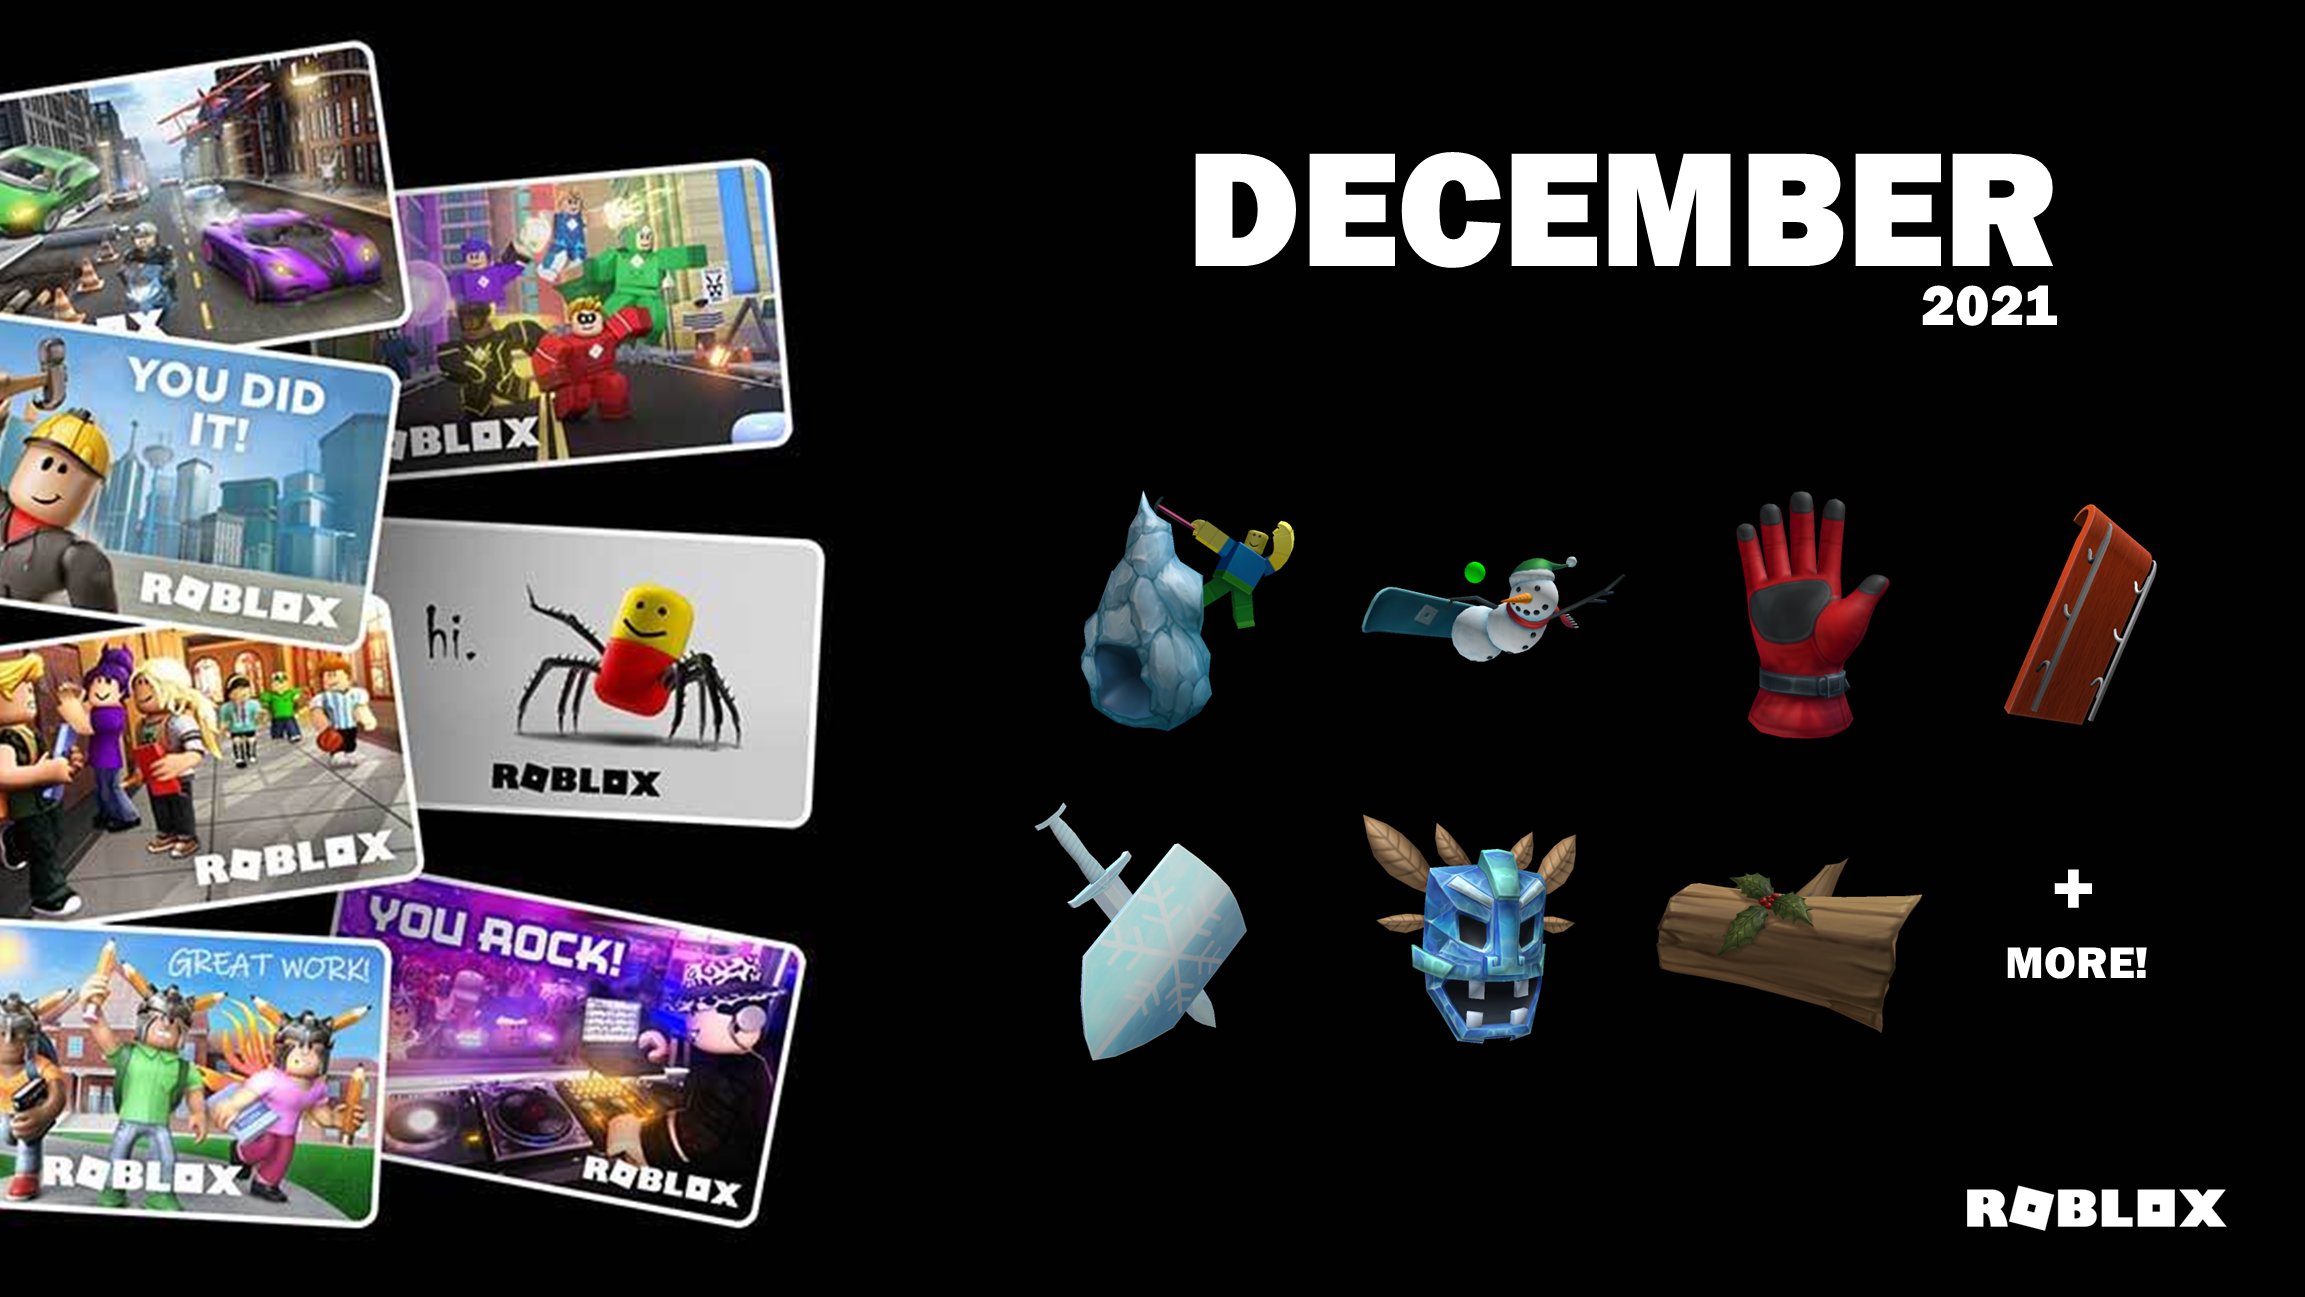 Roblox Gift Cards on X: #Roblox Free Gift Cards are available now